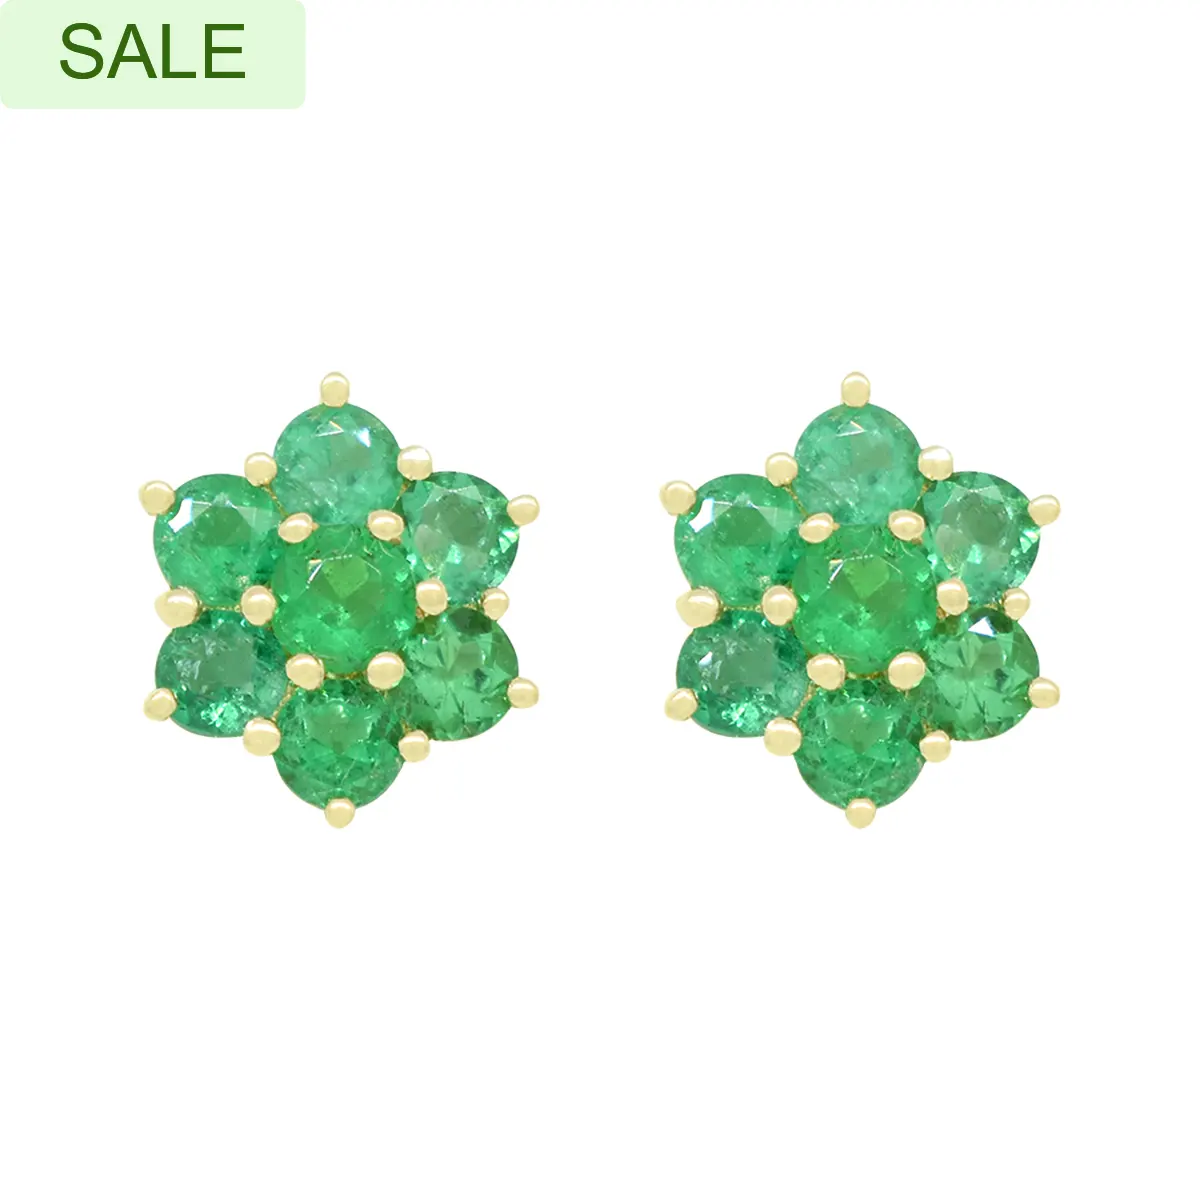 Emerald Earrings in 18K Yellow Gold Cluster Style